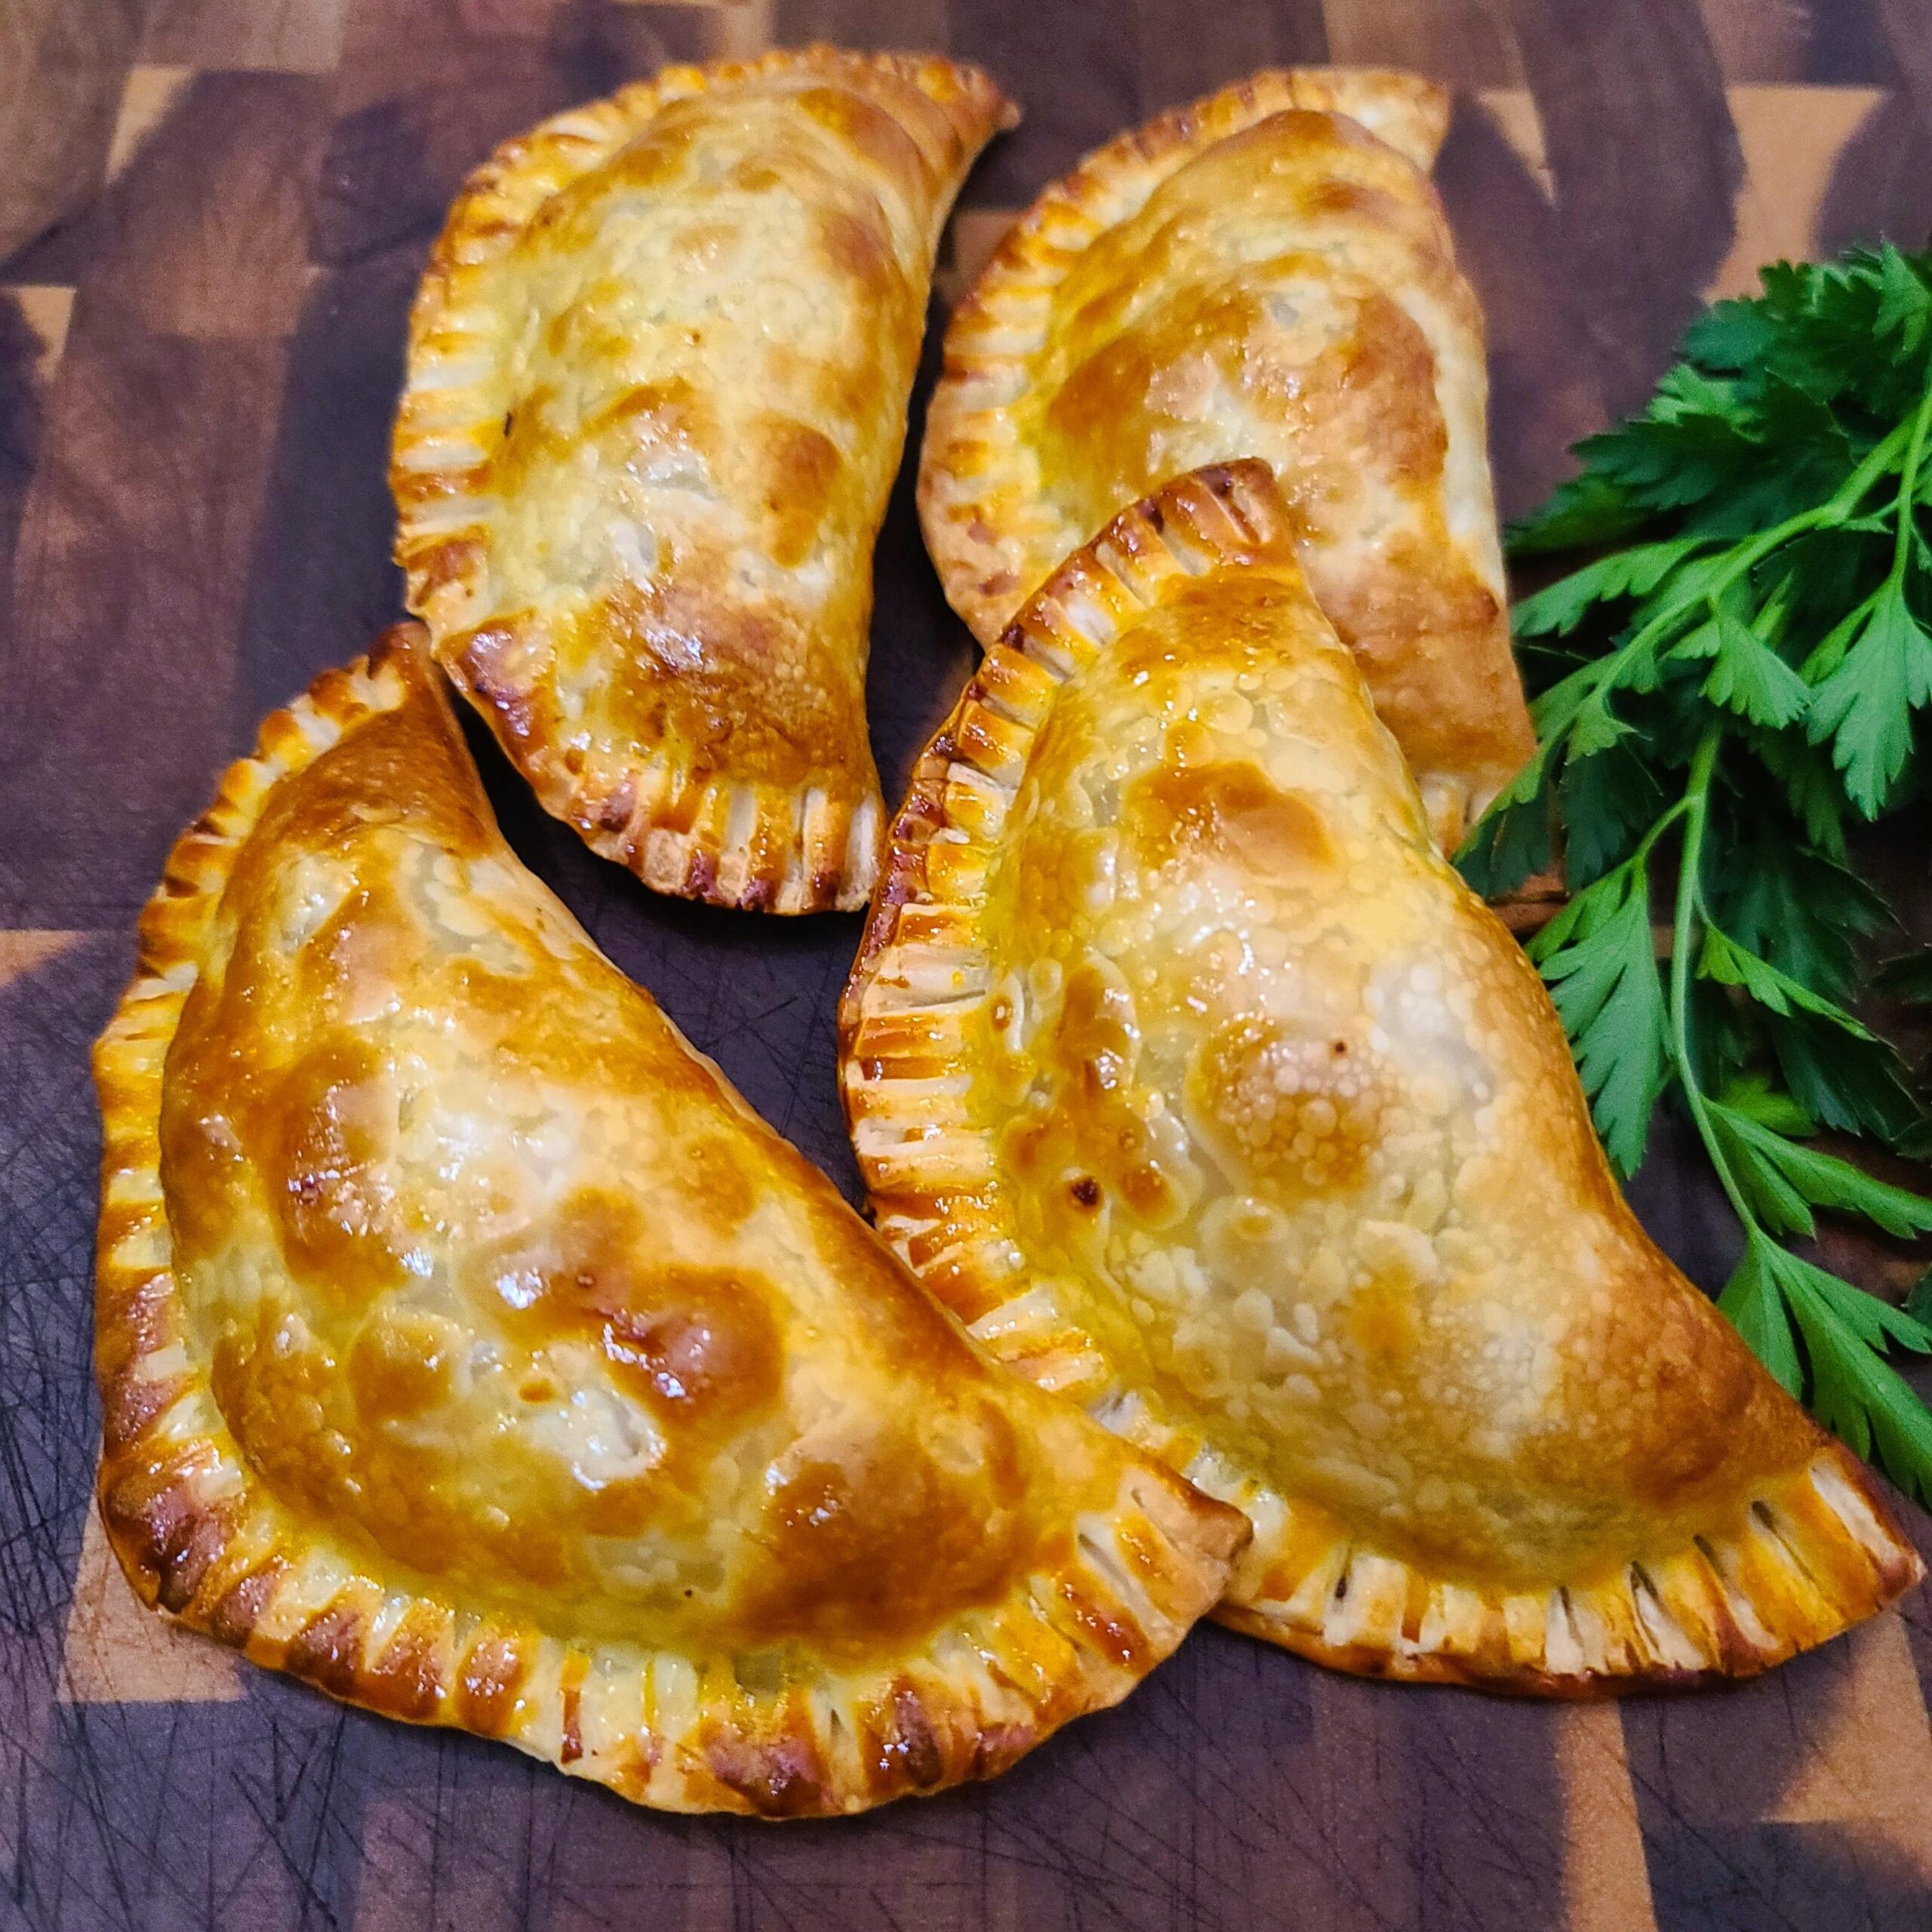  Golden brown and delicious, these baked empanadas are packed with flavor.